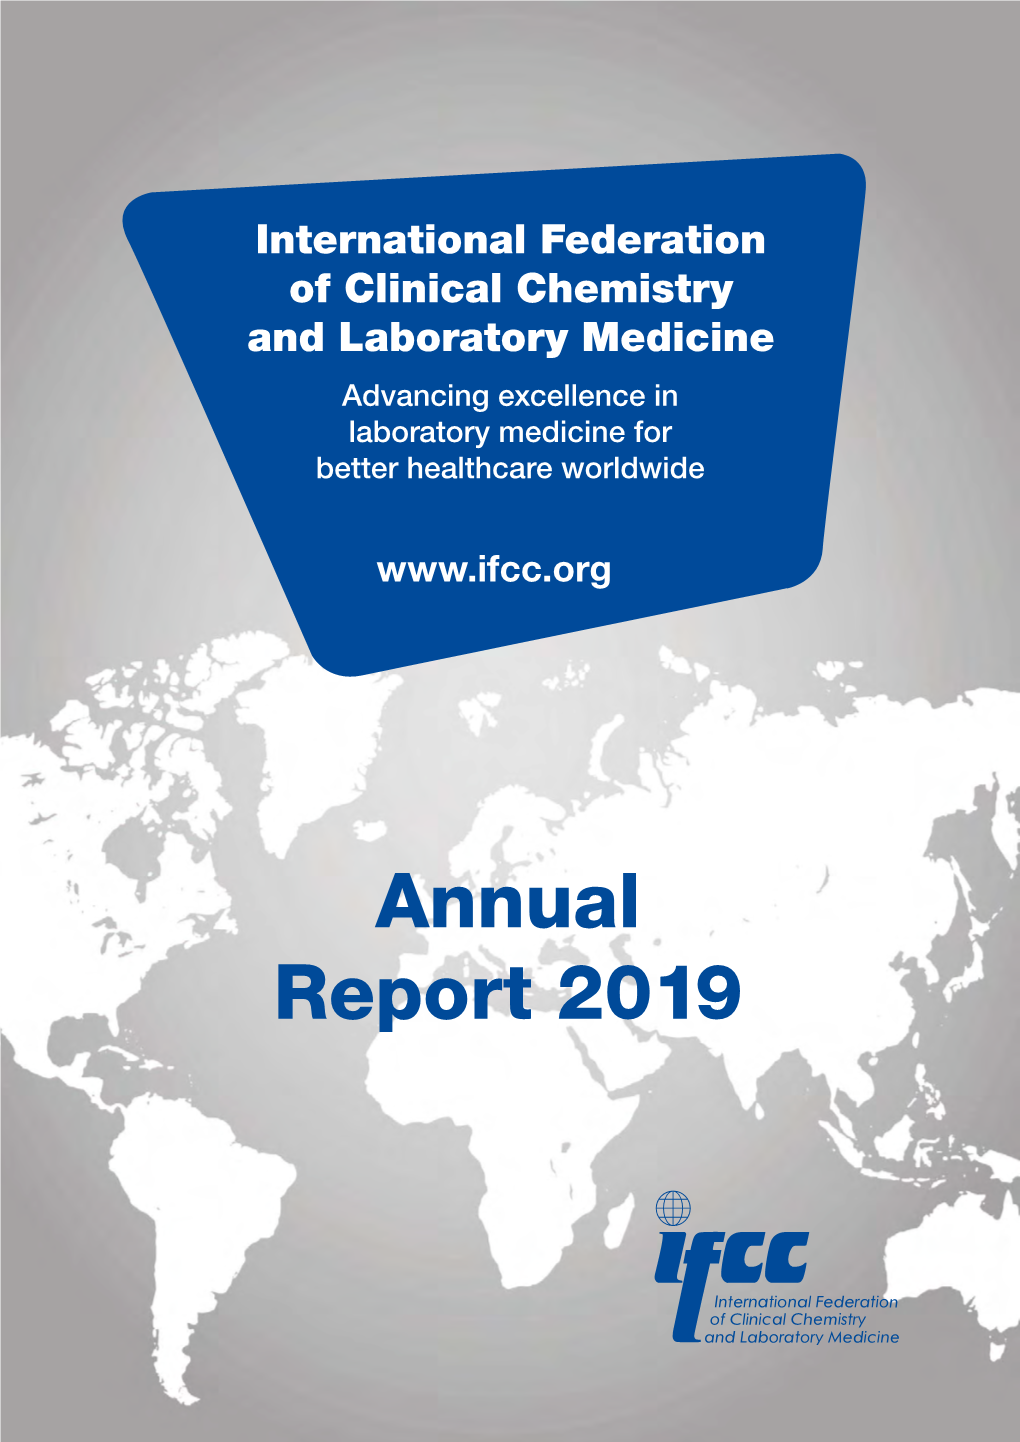 Annual Report 2019 Highlights of the Year